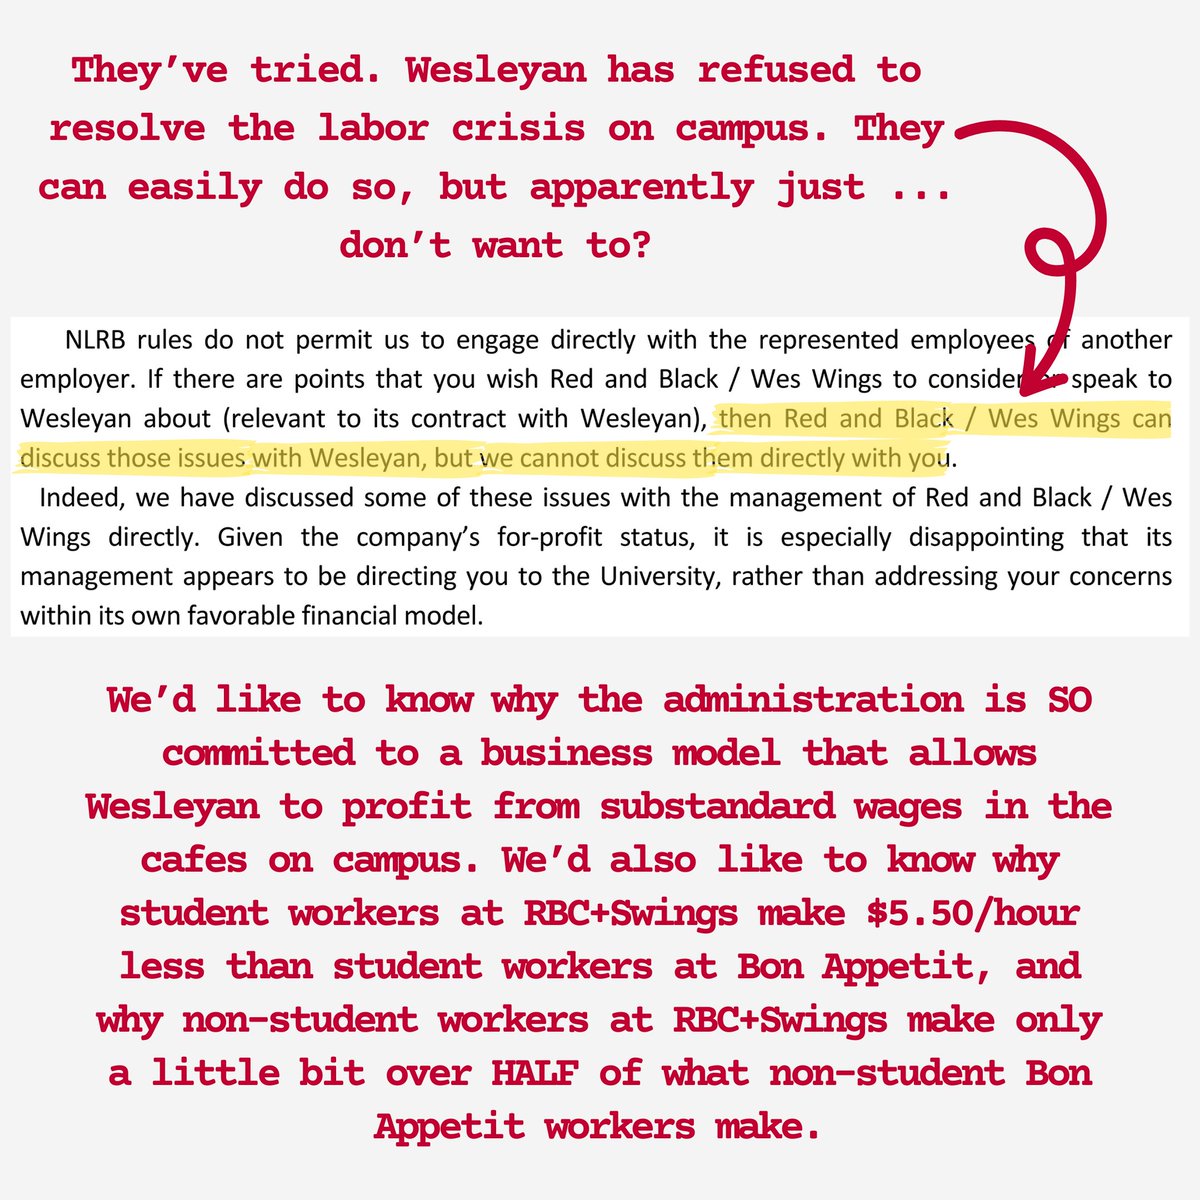 A few days ago, we emailed President Roth asking him to meet with us to talk about how Wesleyan can help ensure dining workers receive equal treatment on our campus. Spoiler alert: he said no. But we have a few notes on his response… (1/2)